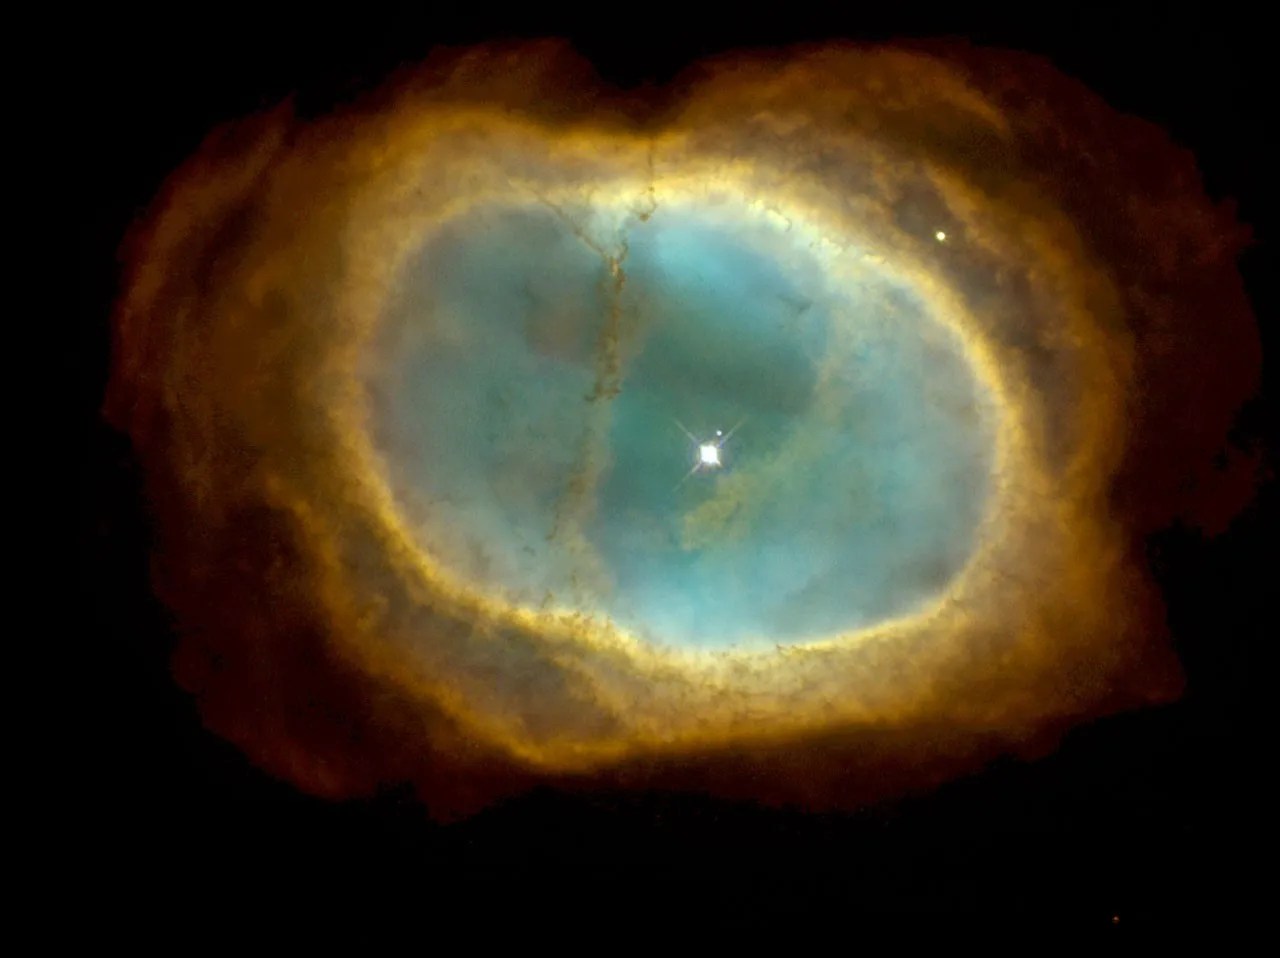 A bright star shines at the center of a rainbow-colored "bubble" spreading outward from it. The inner oval around the star is a turquoise color, which has a yellow ring around it, which then turns to orange, and has red wisps at the outer edges.